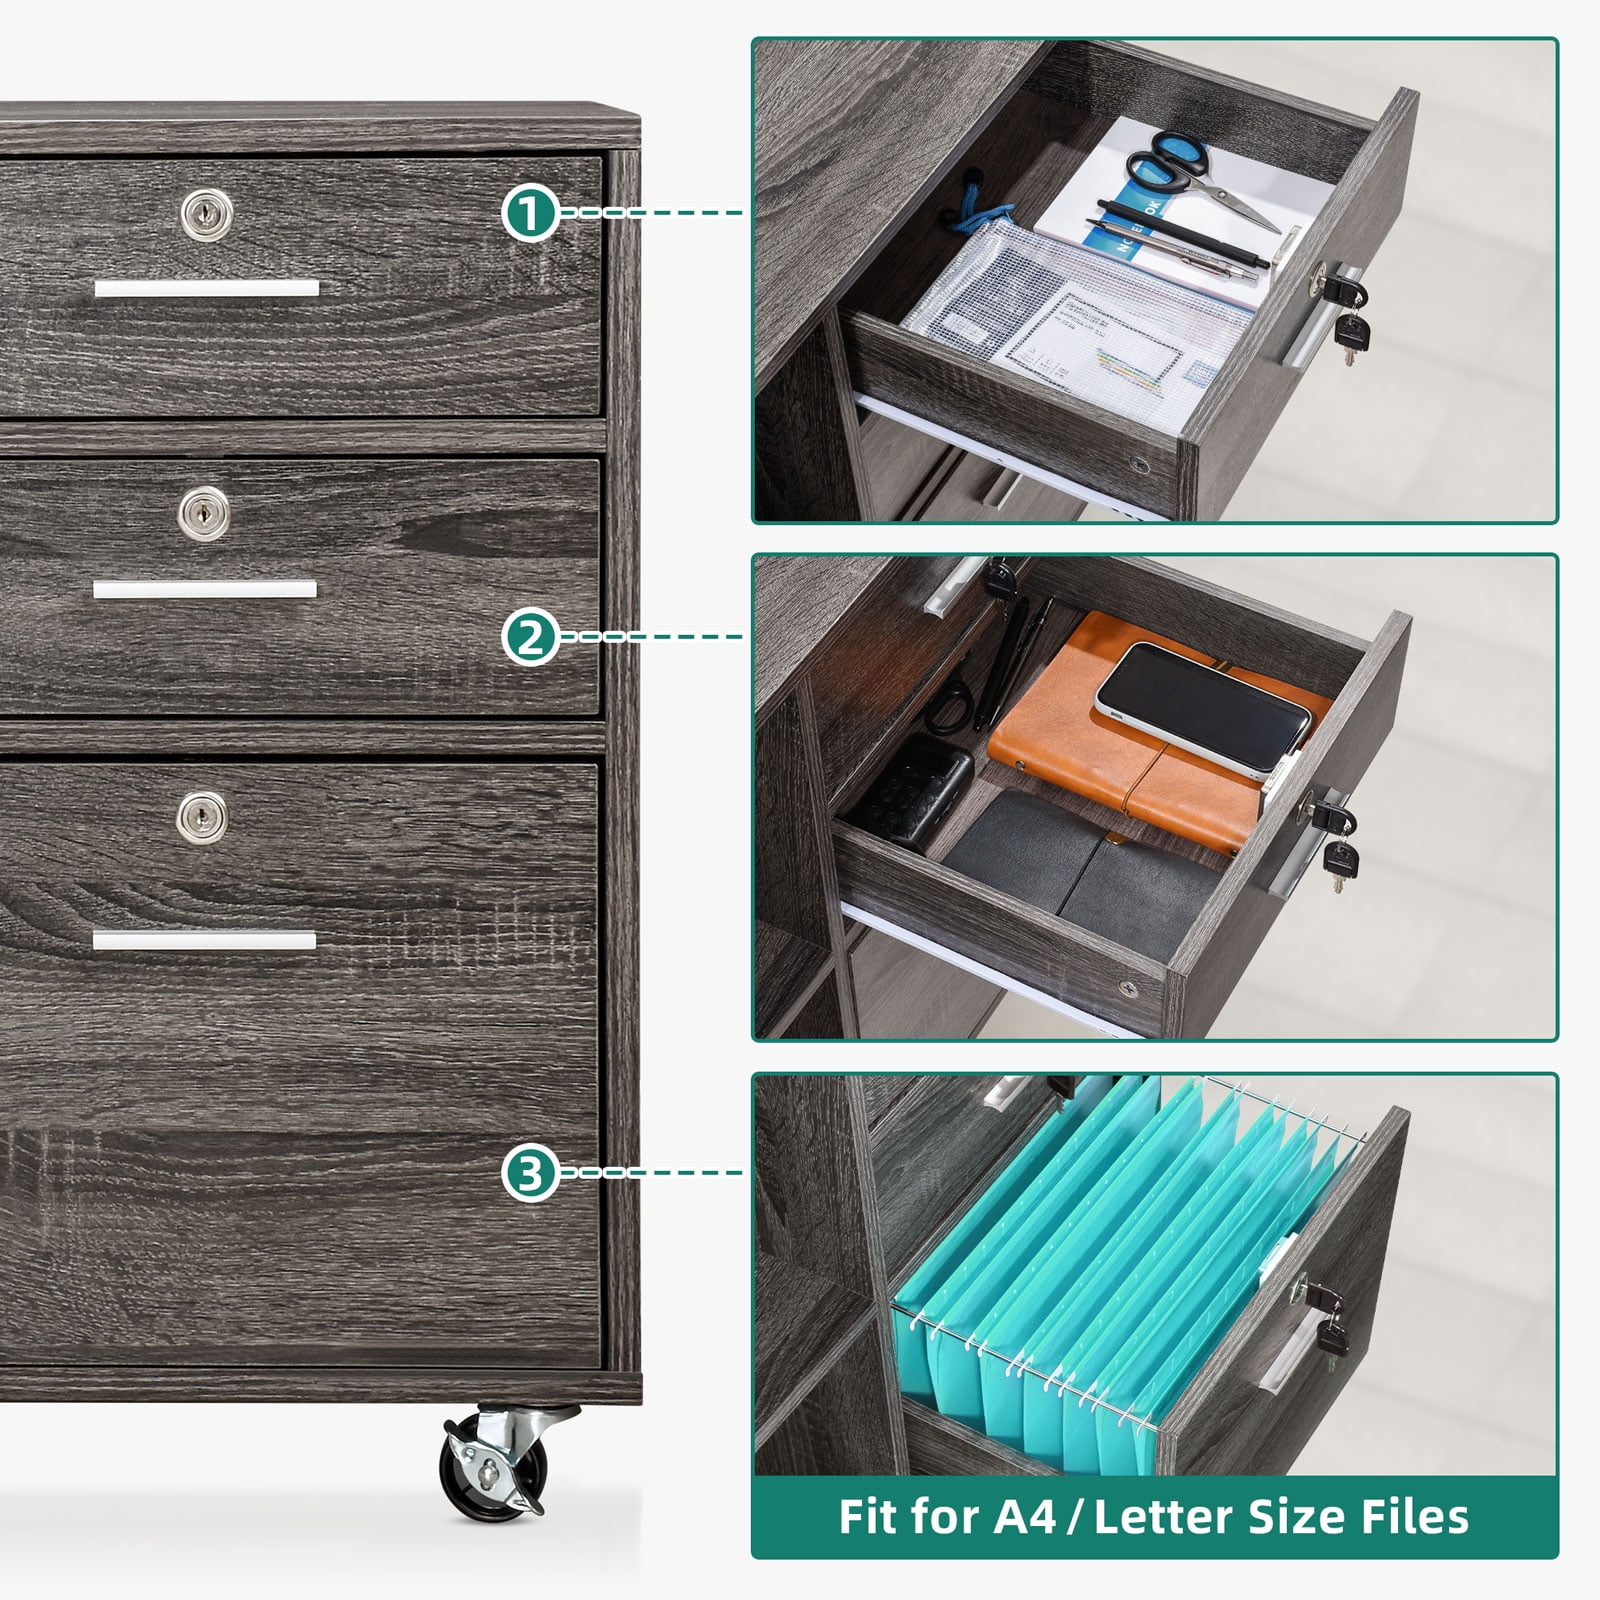 DASROOM 3 Drawer Mobile File Cabinet Wood Filing Cabinet Fits A4 or Letter Size with Wheels for Office and Home Use Grey & Oak 